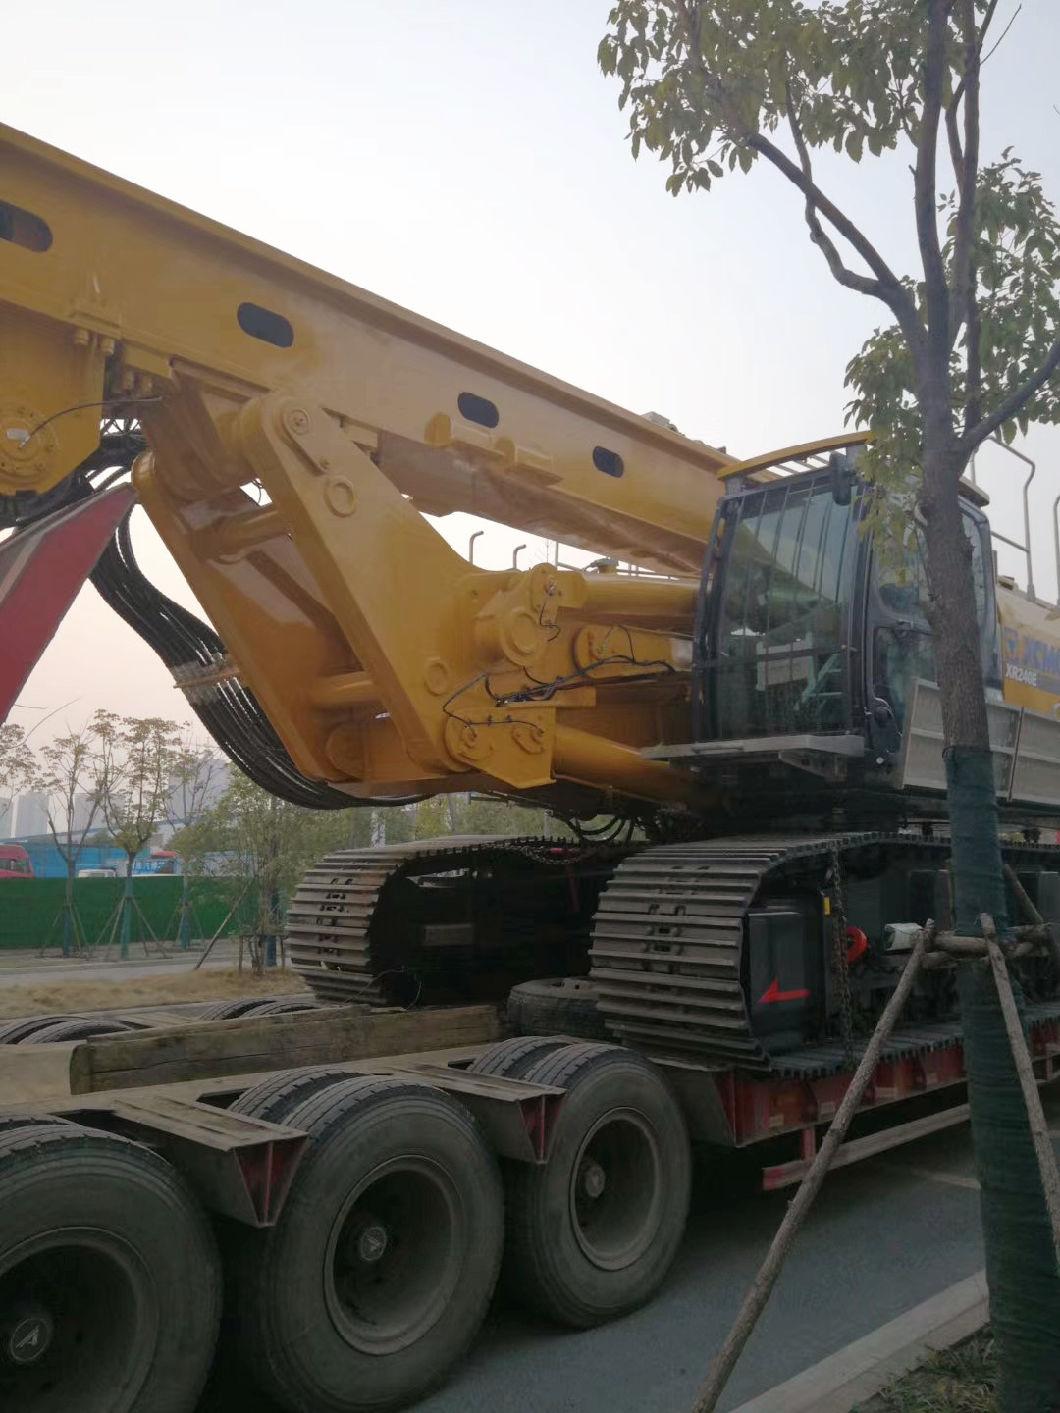 2200mm Diameter Hydraulic Rotary Water Well Drilling Rig